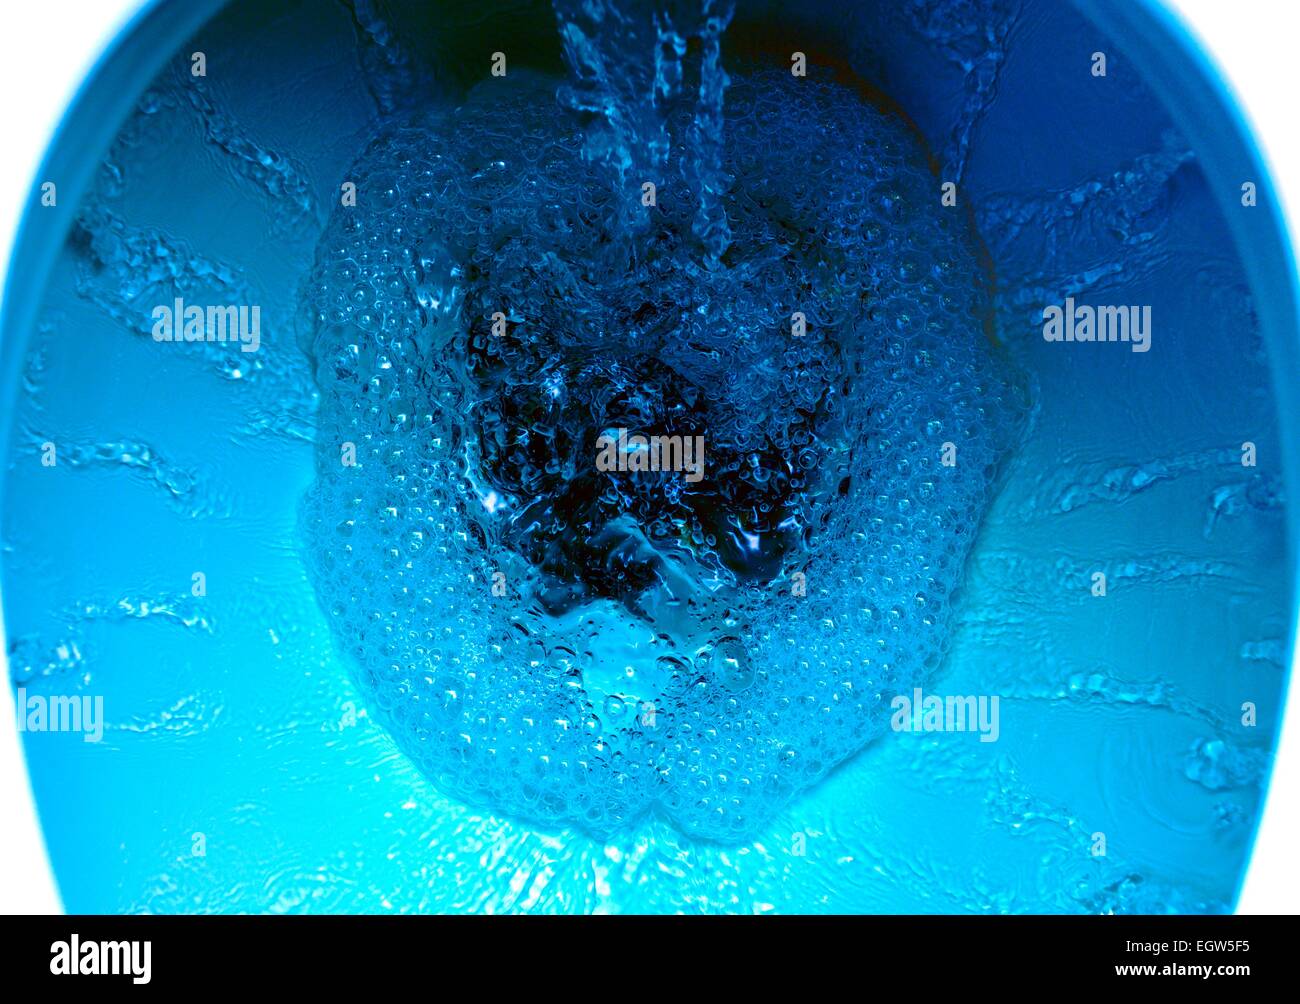 A domestic toilet flushing water.Digitally colored Stock Photo